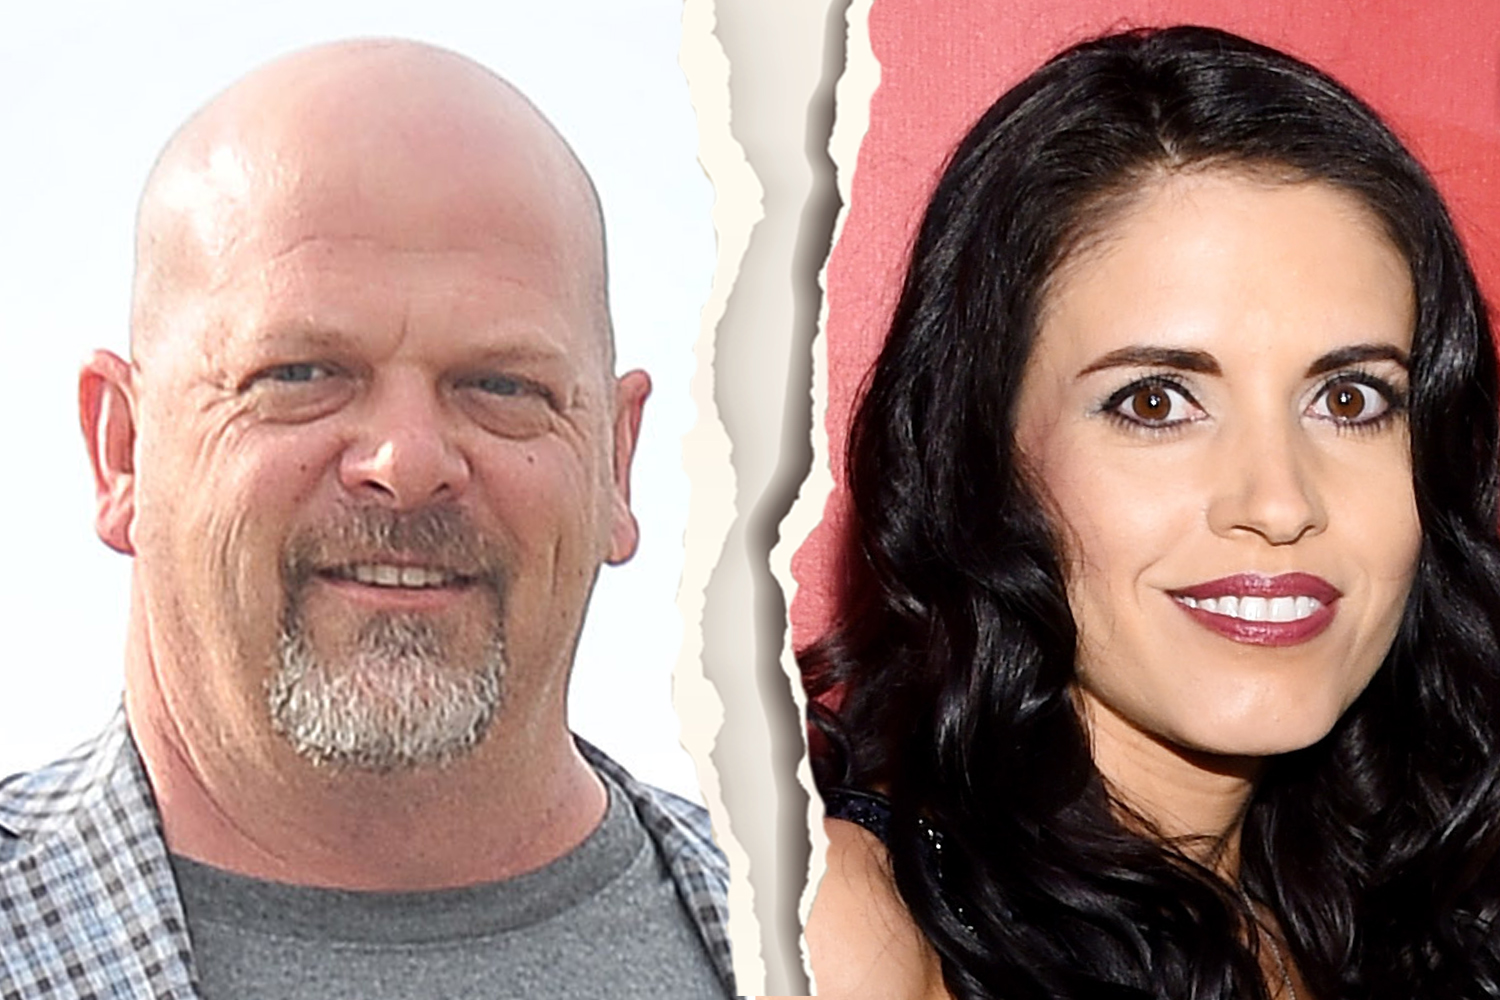 Pawn Stars' Rick Harrison 'quietly divorced wife Deanna in 2020' after